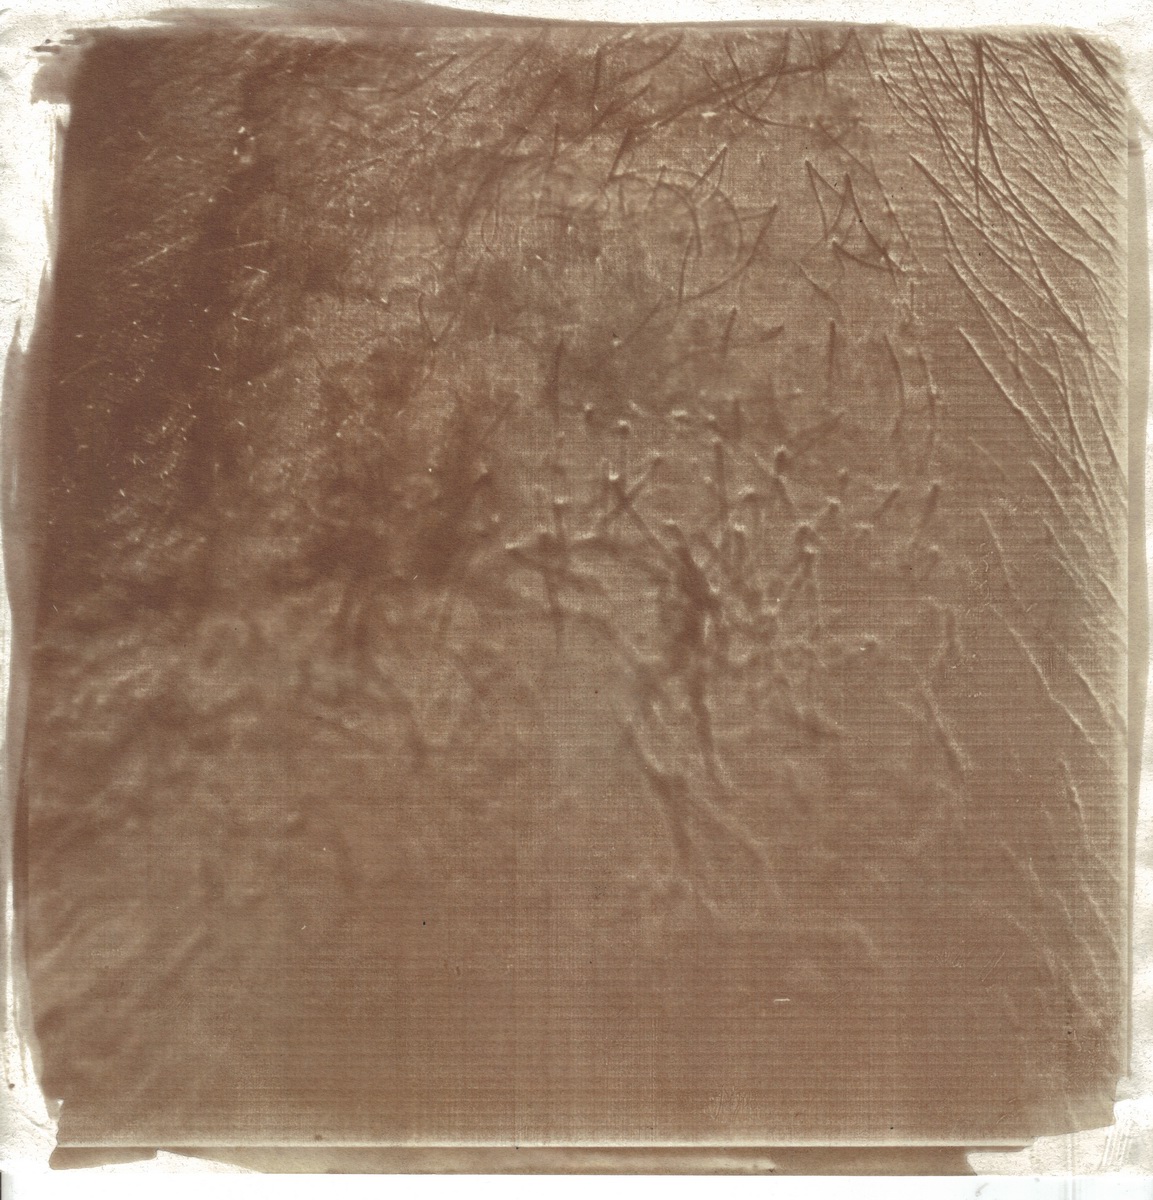 talbotype salted paper salt paper calotype talbotipo calotipo abstract male man body Landscape skin sun print